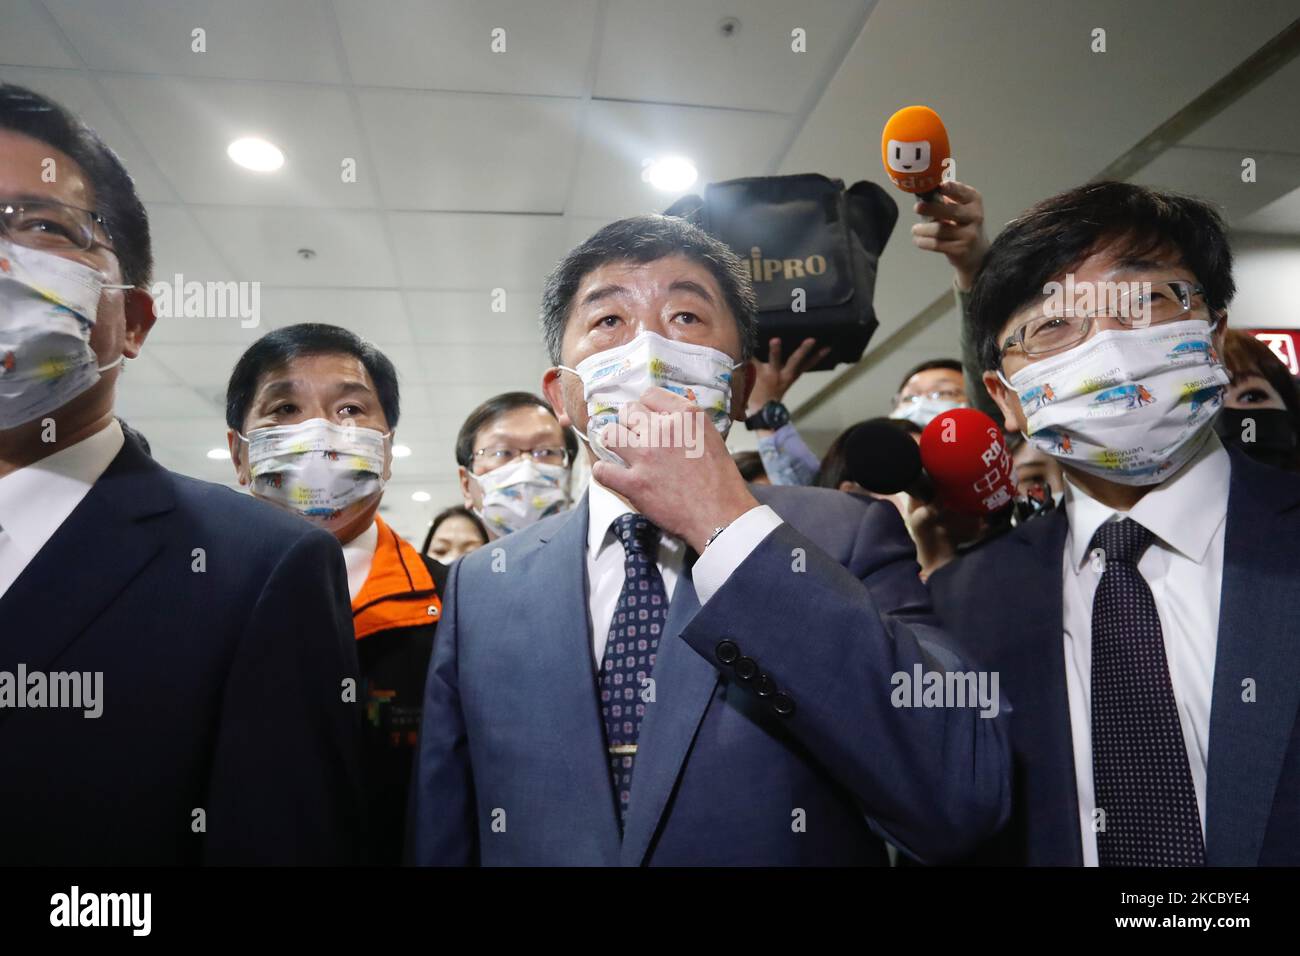 Taiwan's Health Minister Chen Shih-chung (C) arrives to inspect Covid-19 coronavirus testing at Taoyuan International Airport near Taipei on April 1, 2021, as Taiwanese tourists headed to Palau under the first travel bubble in Indo-Pacific Asia. (Photo by Ceng Shou Yi/NurPhoto) Stock Photo